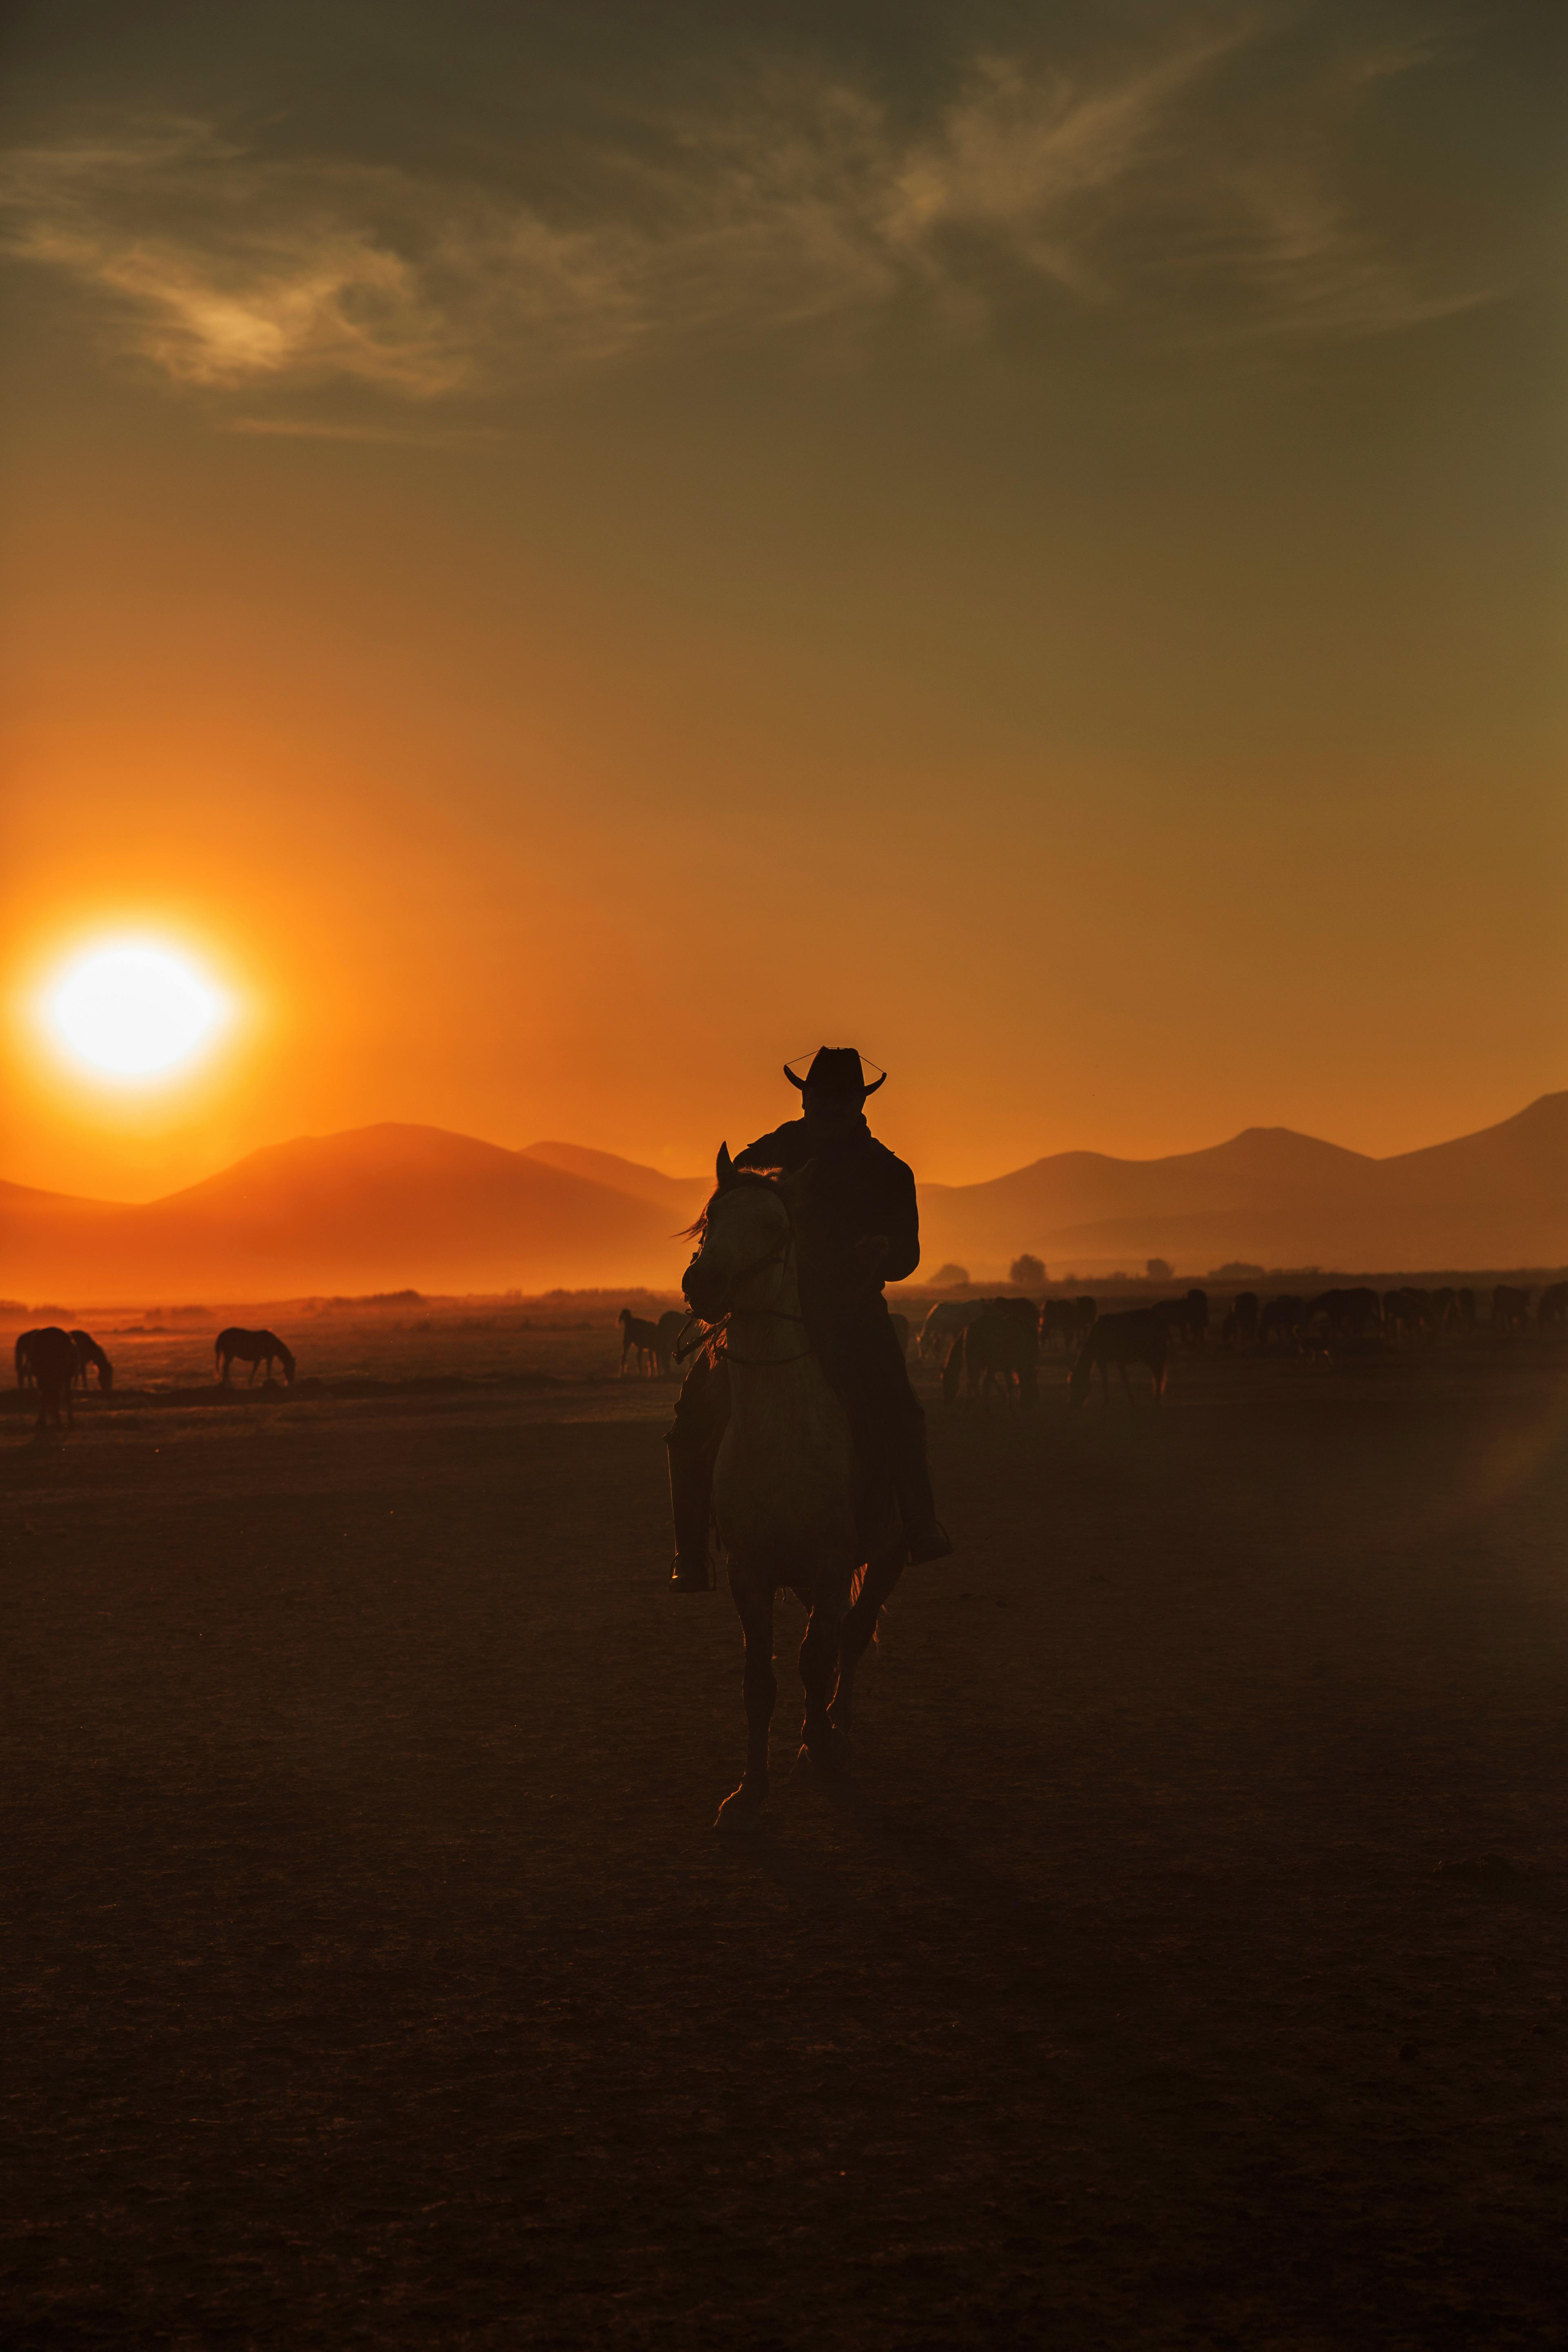  Silhouette of a Cowboy Riding a Horse at Sunset